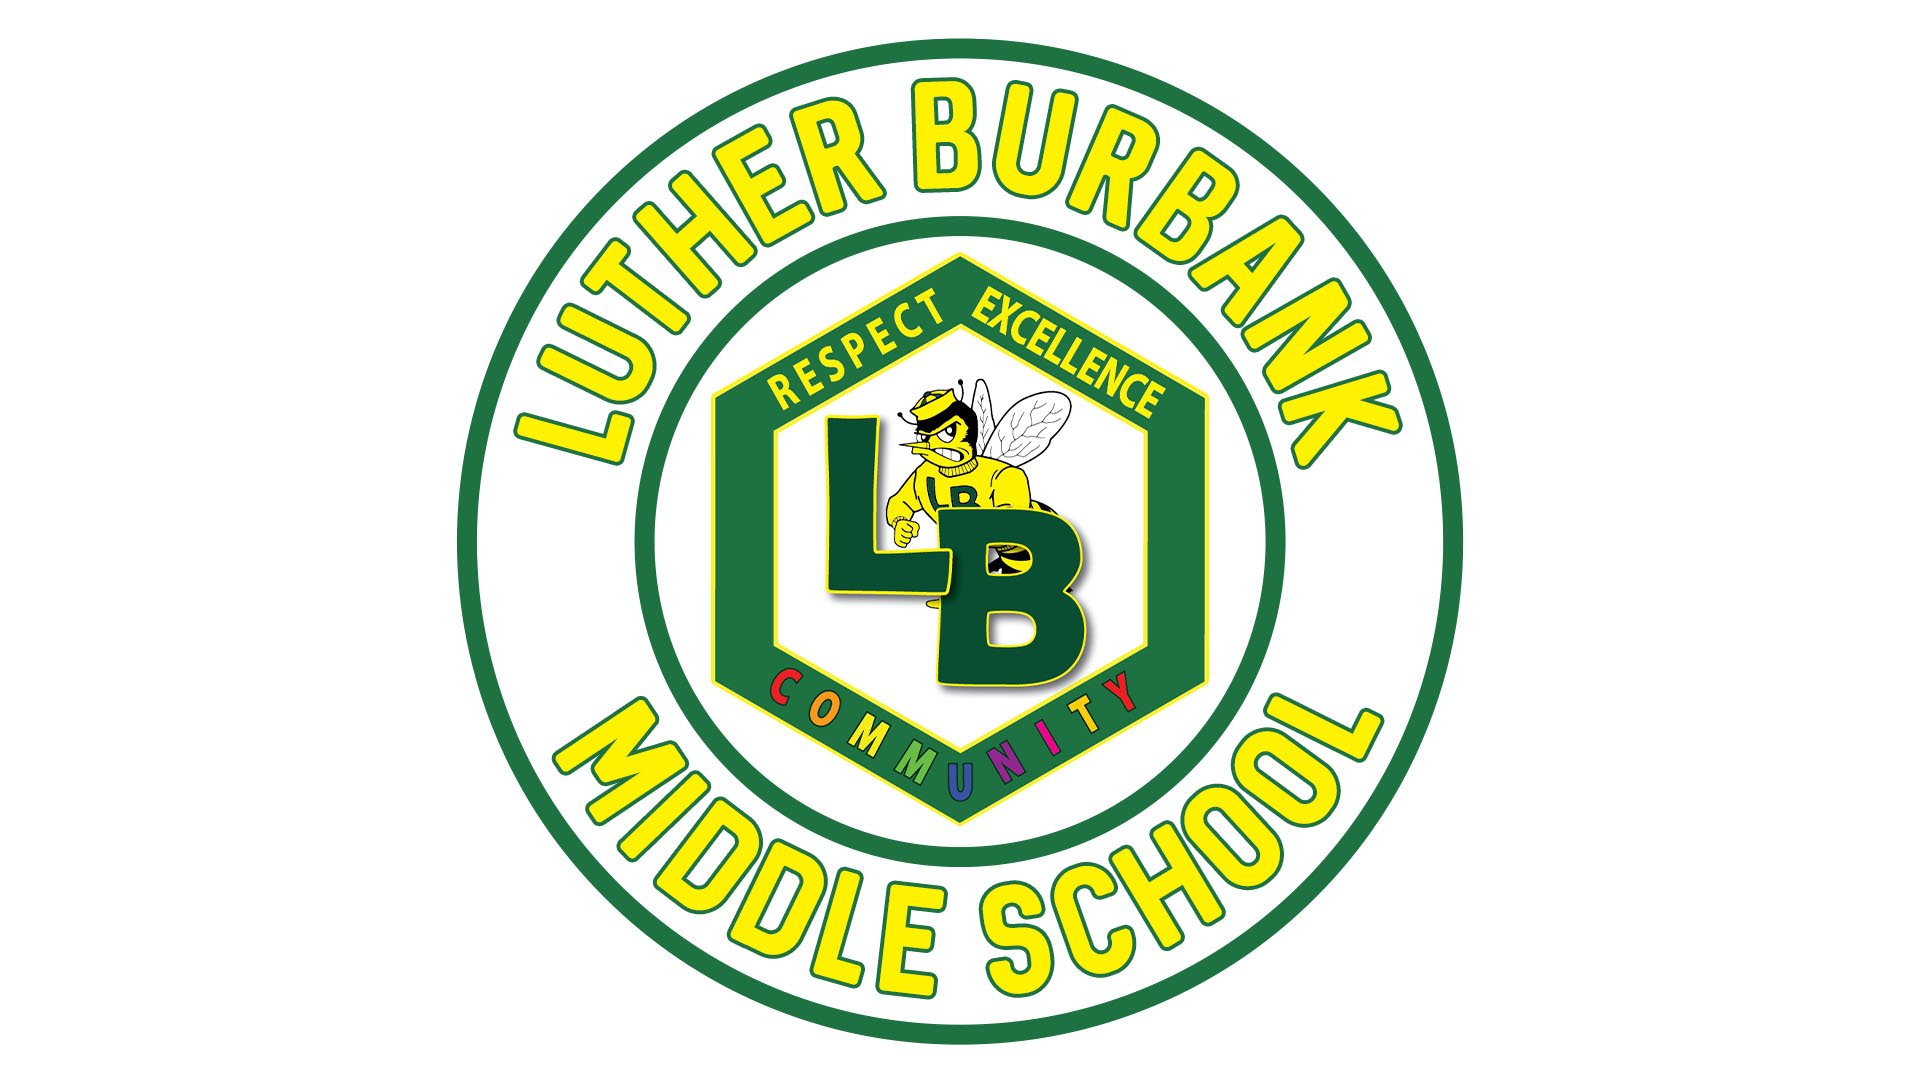 Luther Burbank Middle School Core Values Logo.jpg